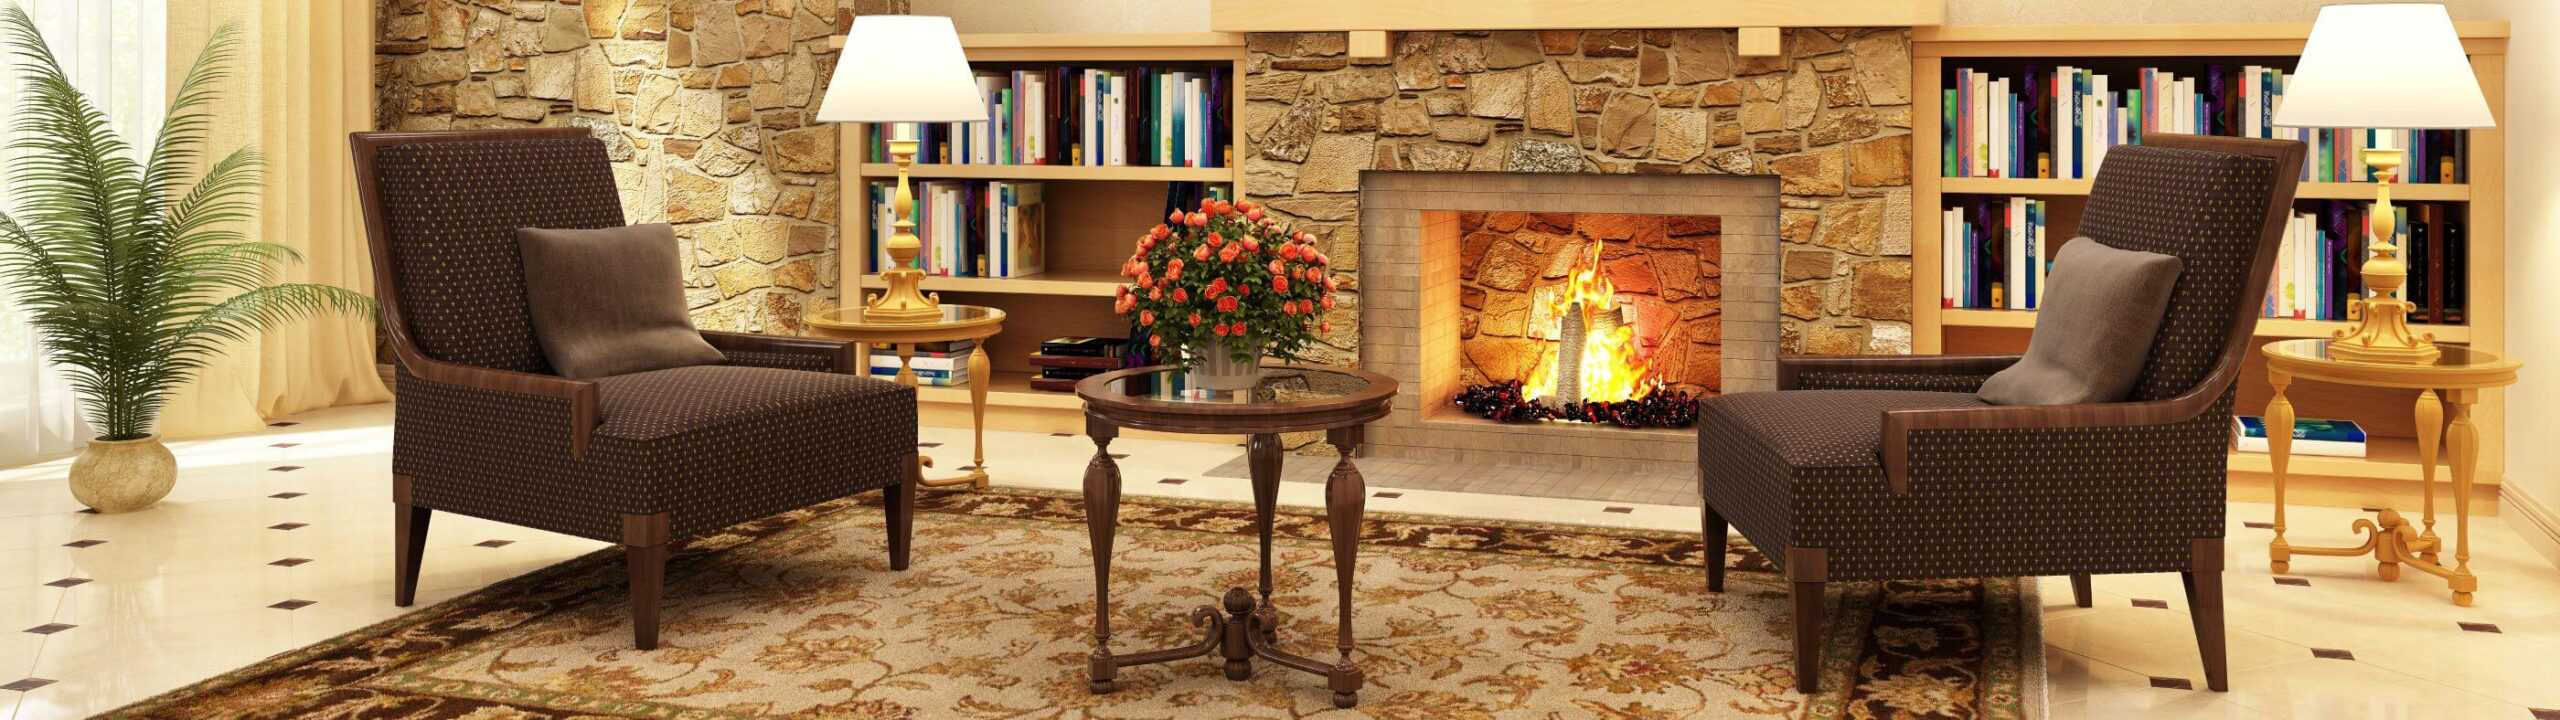 Luxury Fireplace Remodel